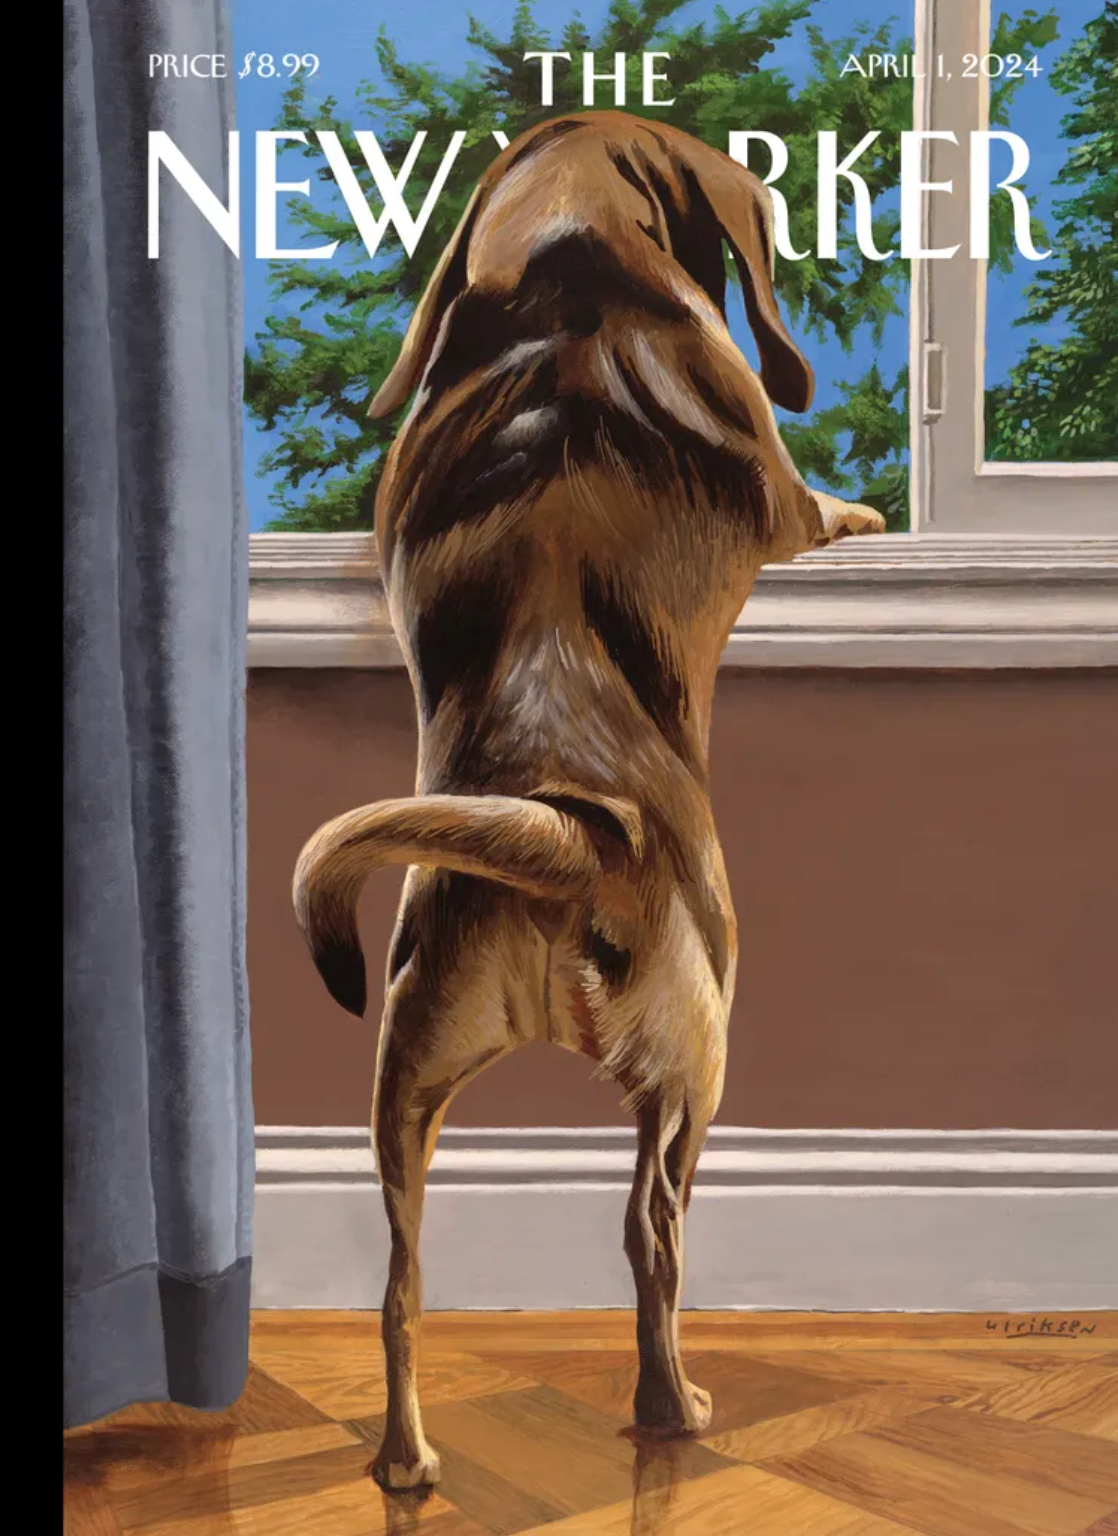 The New Yorker; April 1, 2024